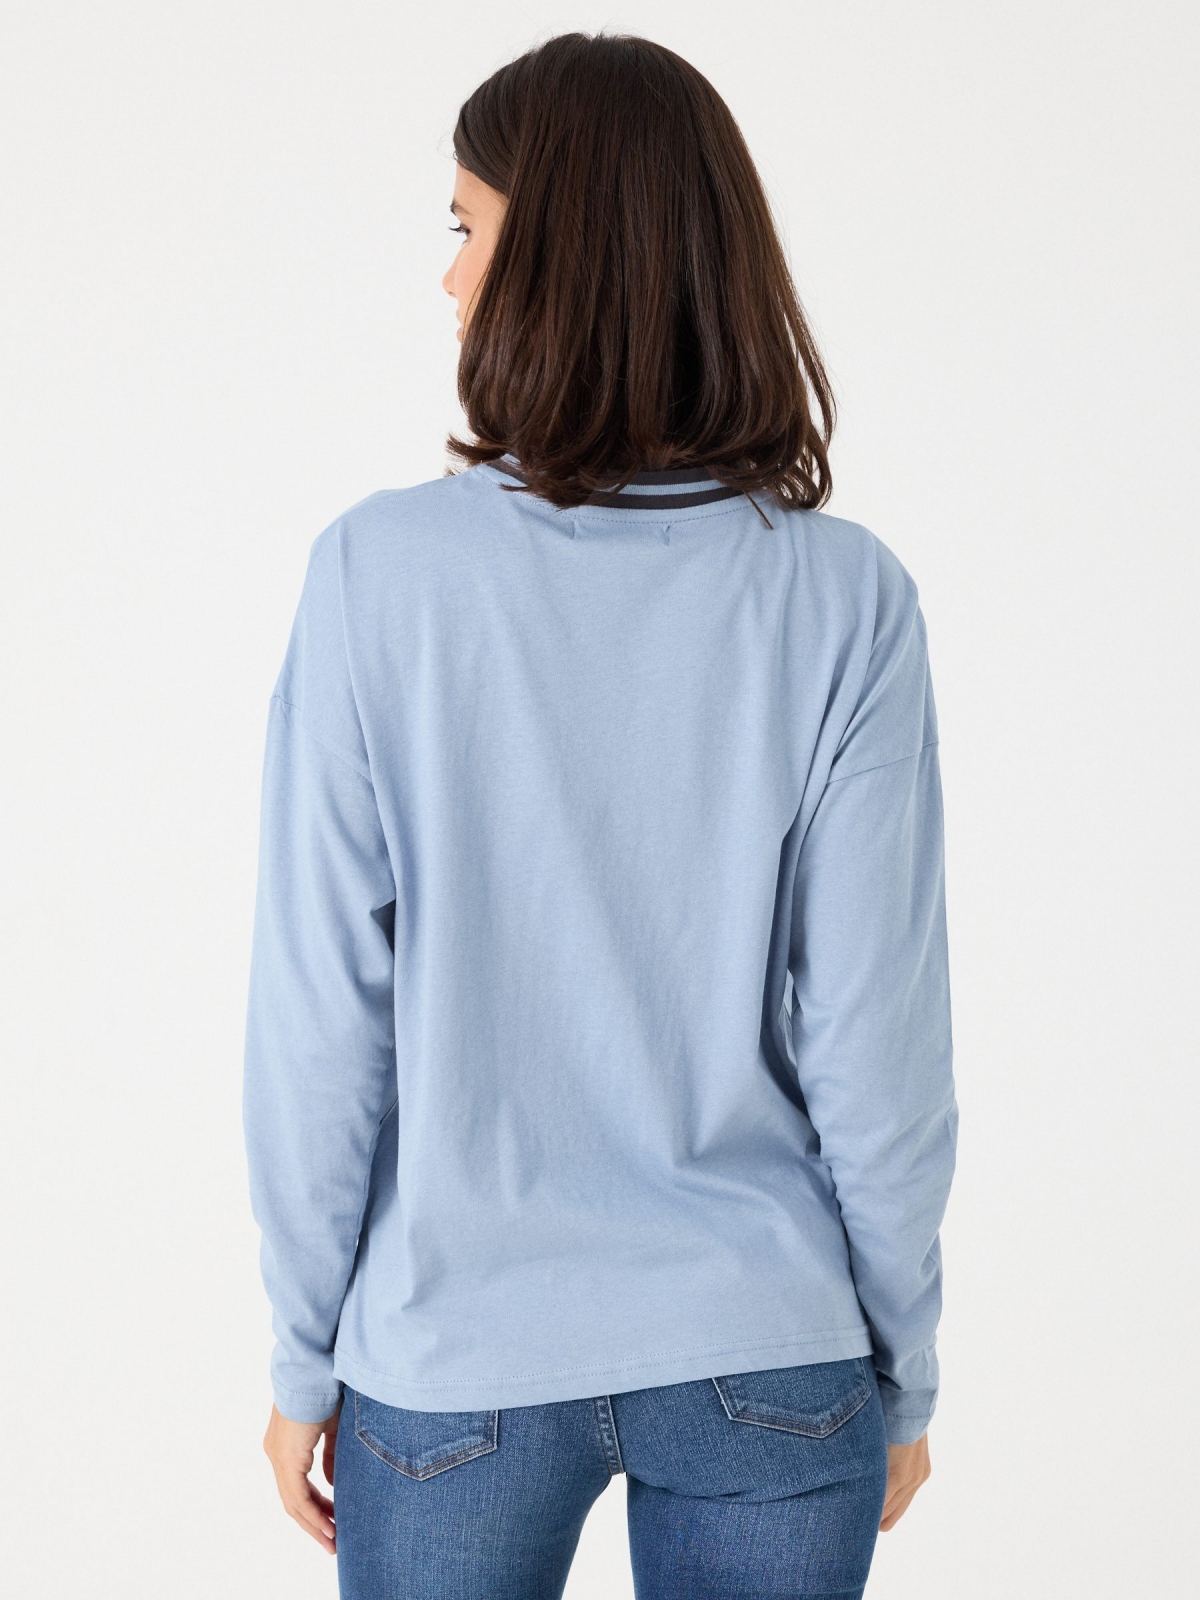 Printed ribbed neck t-shirt light blue middle back view